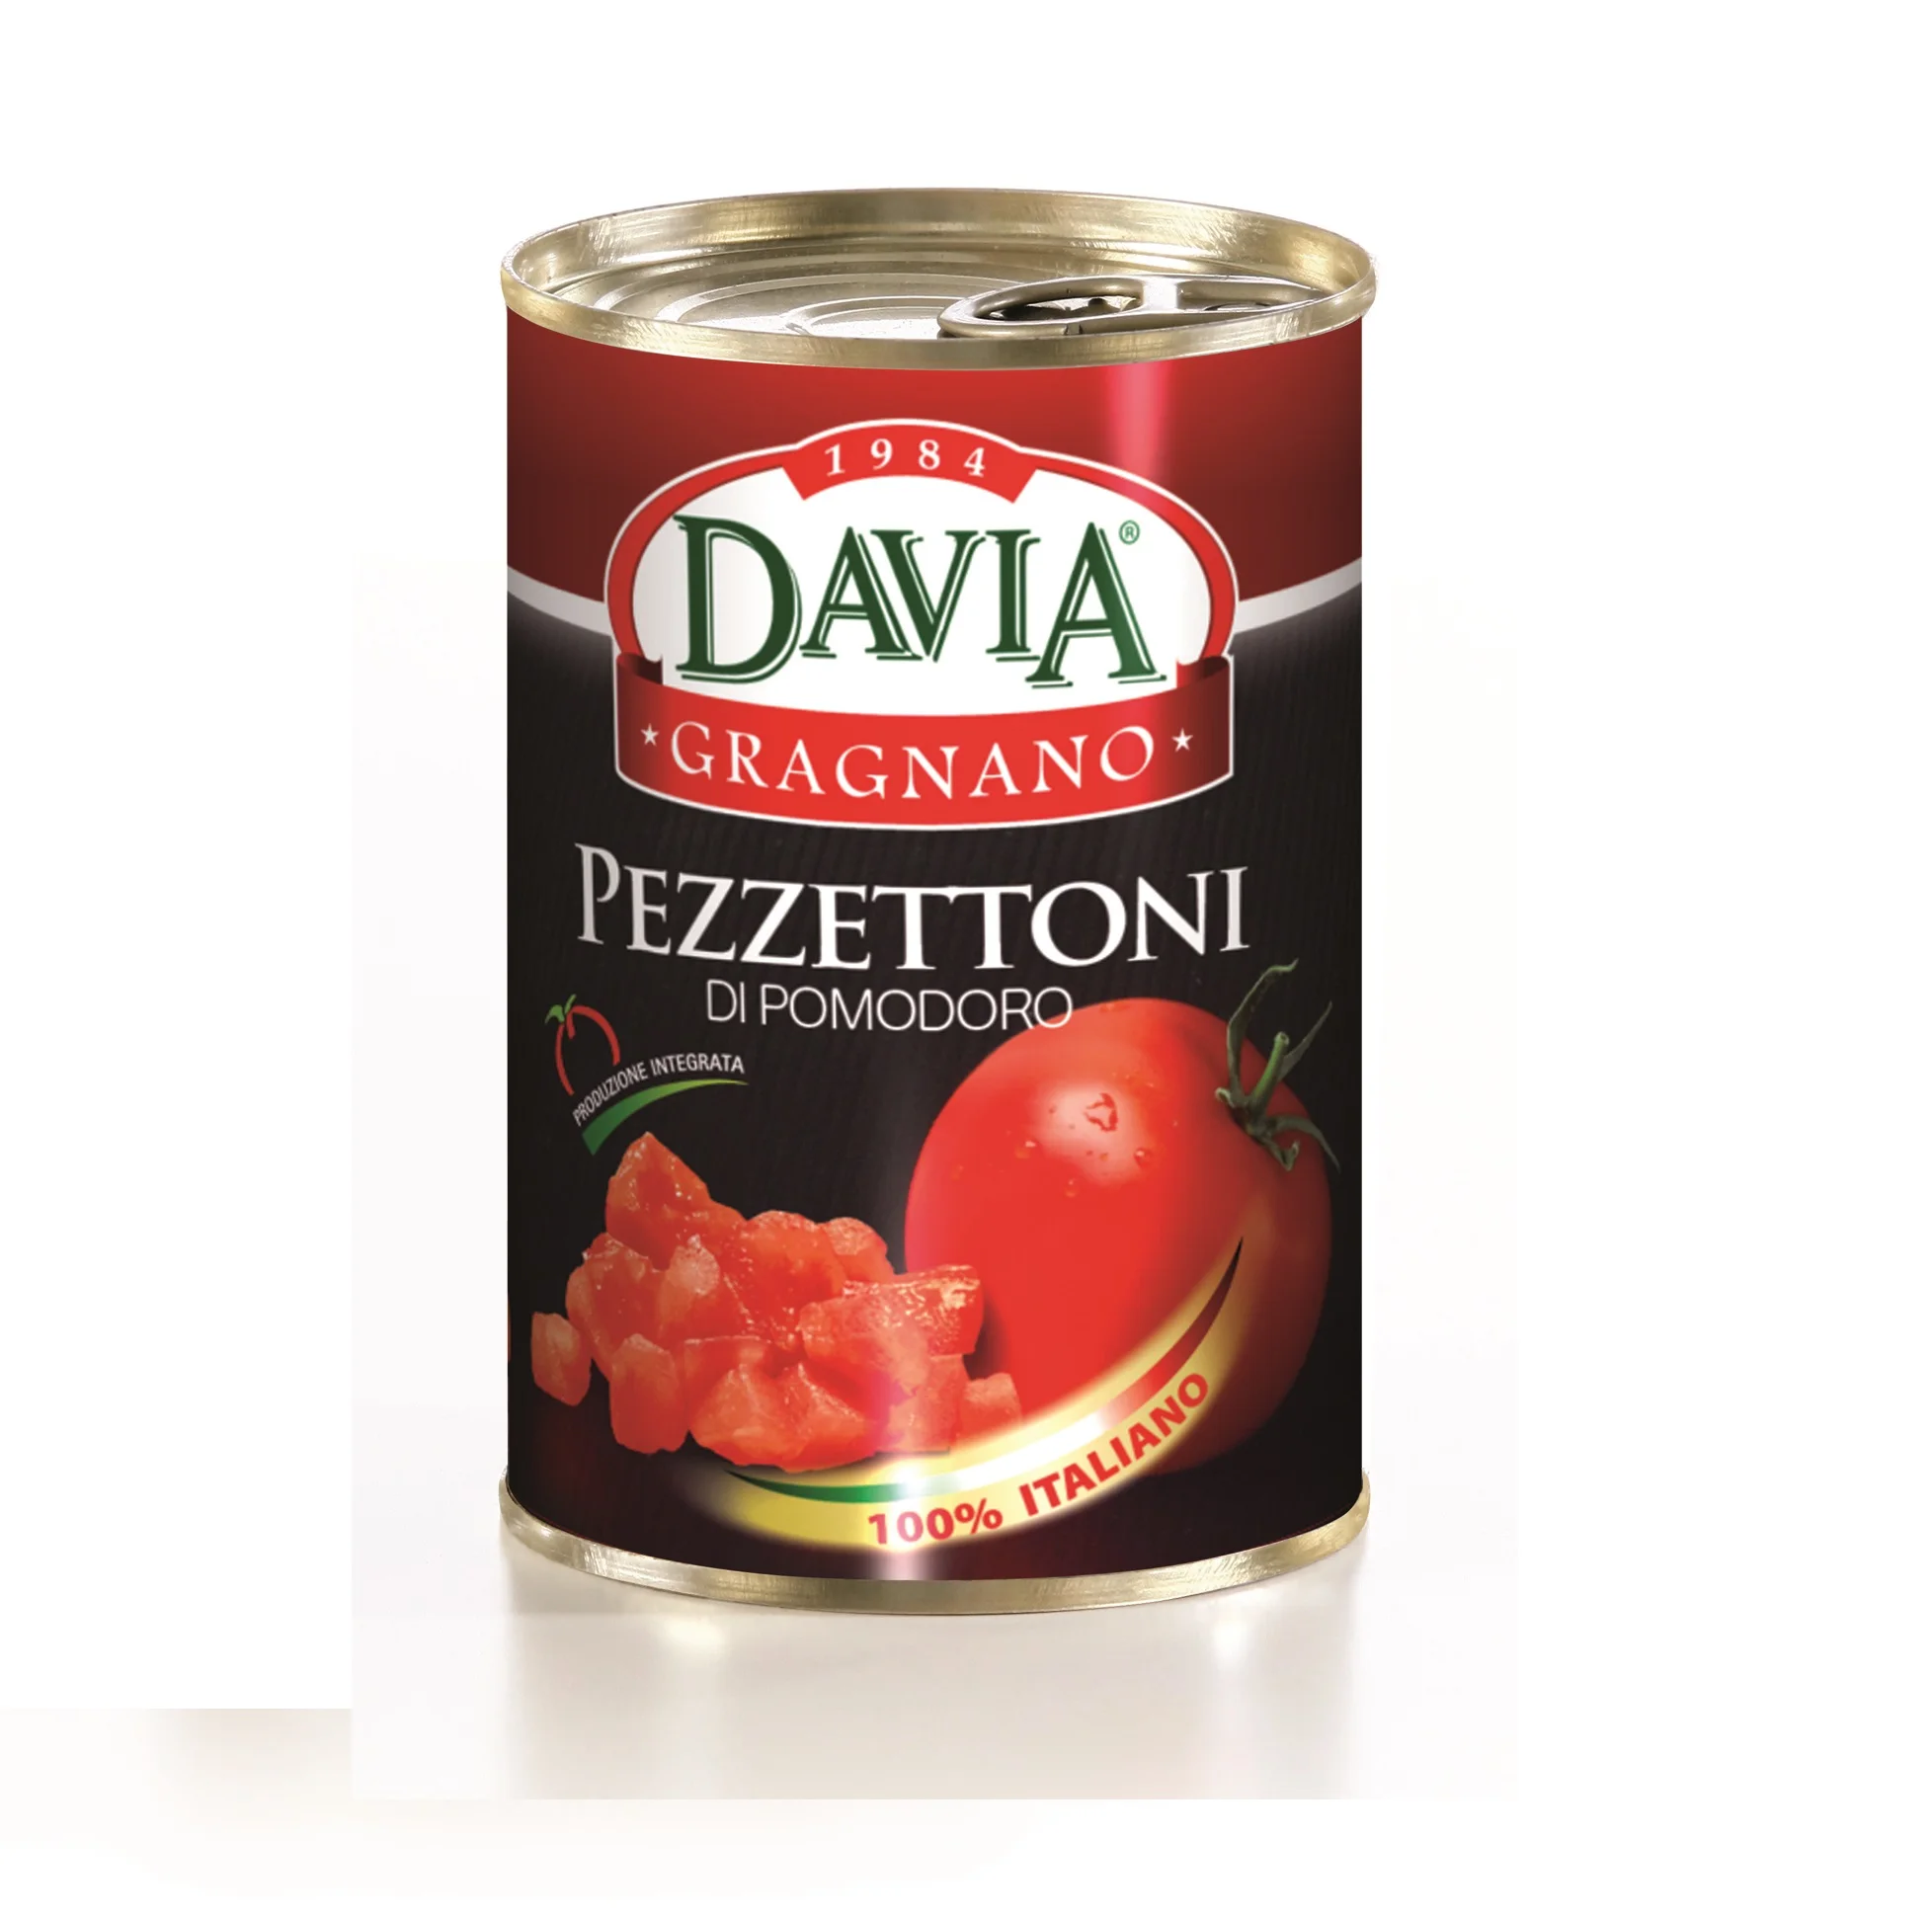 
diced tomato in can   24 x 400 grams  (62010020260)